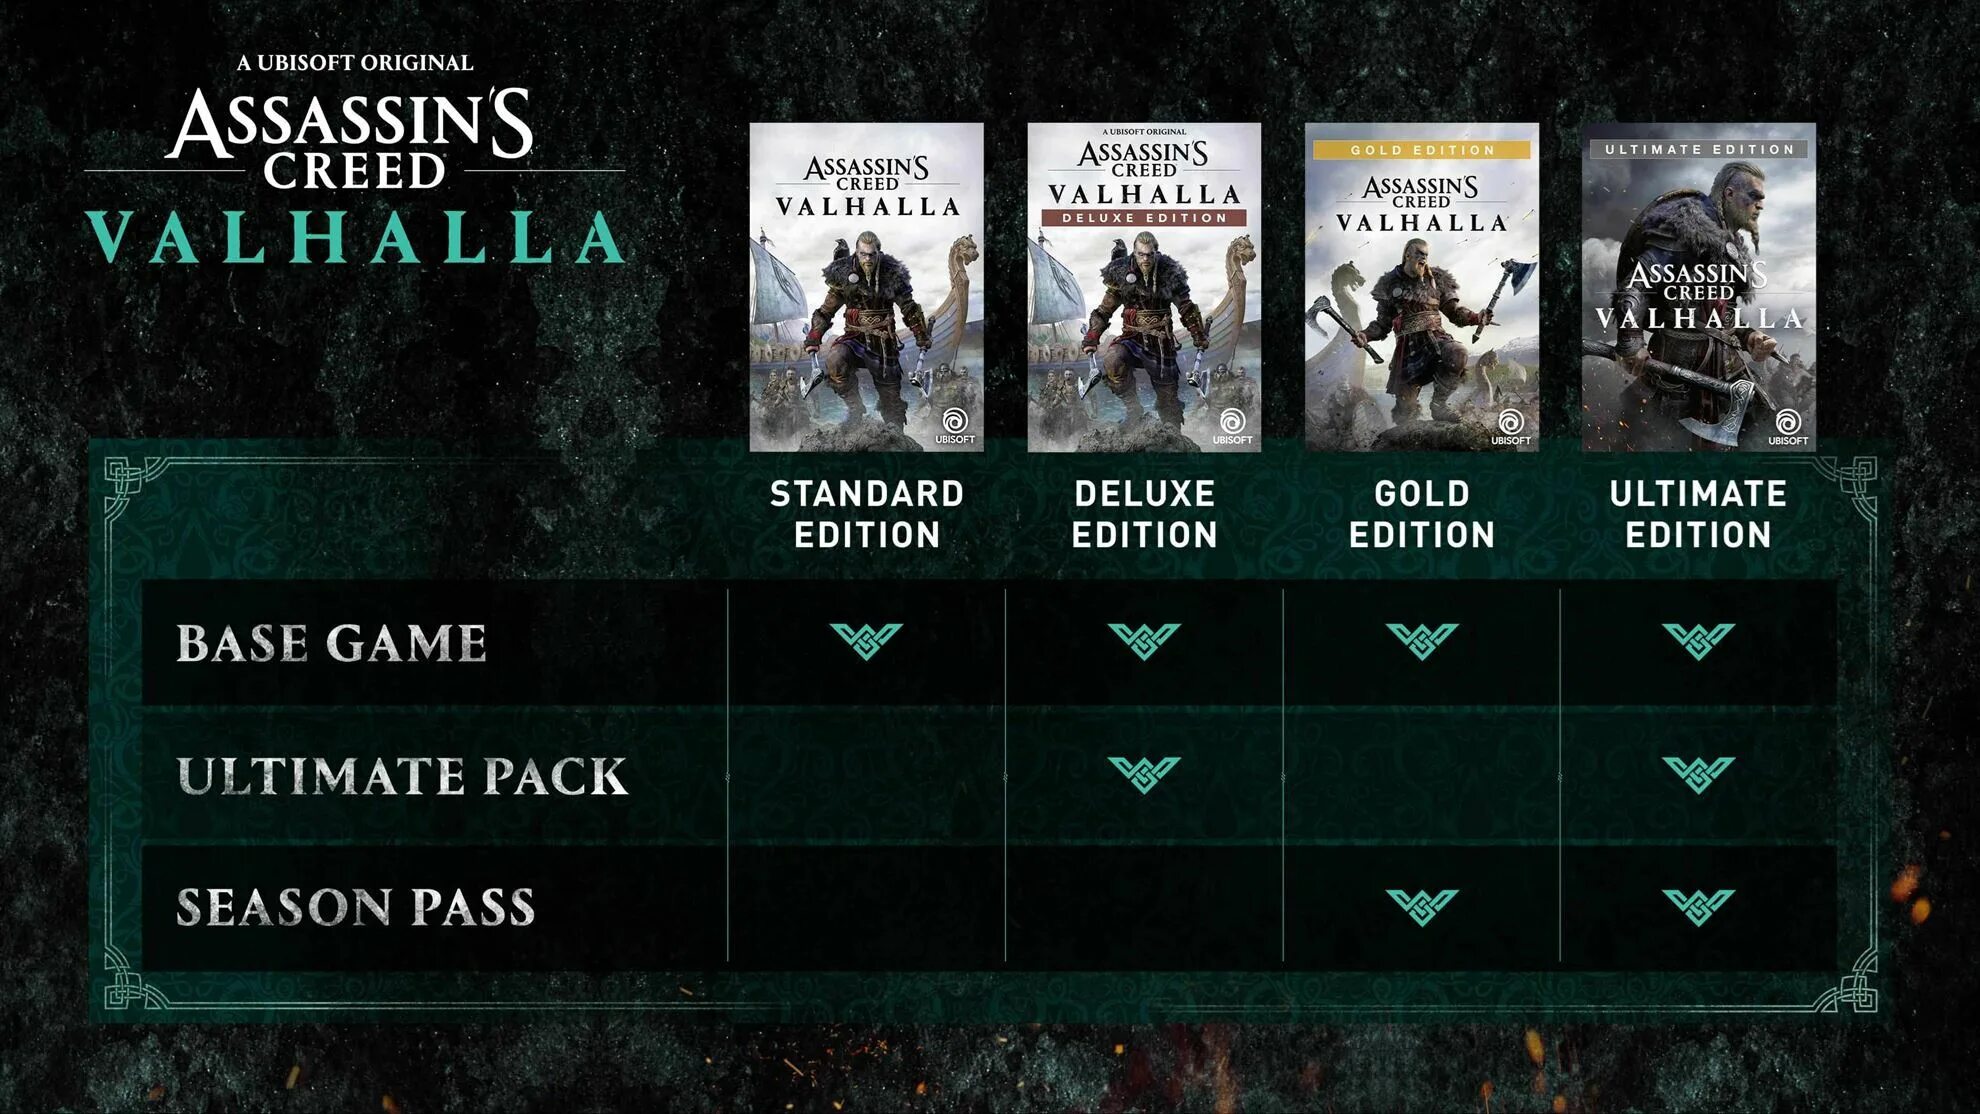 Assassin's Creed Valhalla Deluxe Edition. Ассасин Вальгалла Сеасон пасс. Вальхалла аса ассасин Крид. Assassin's Creed Valhalla Gold Edition.